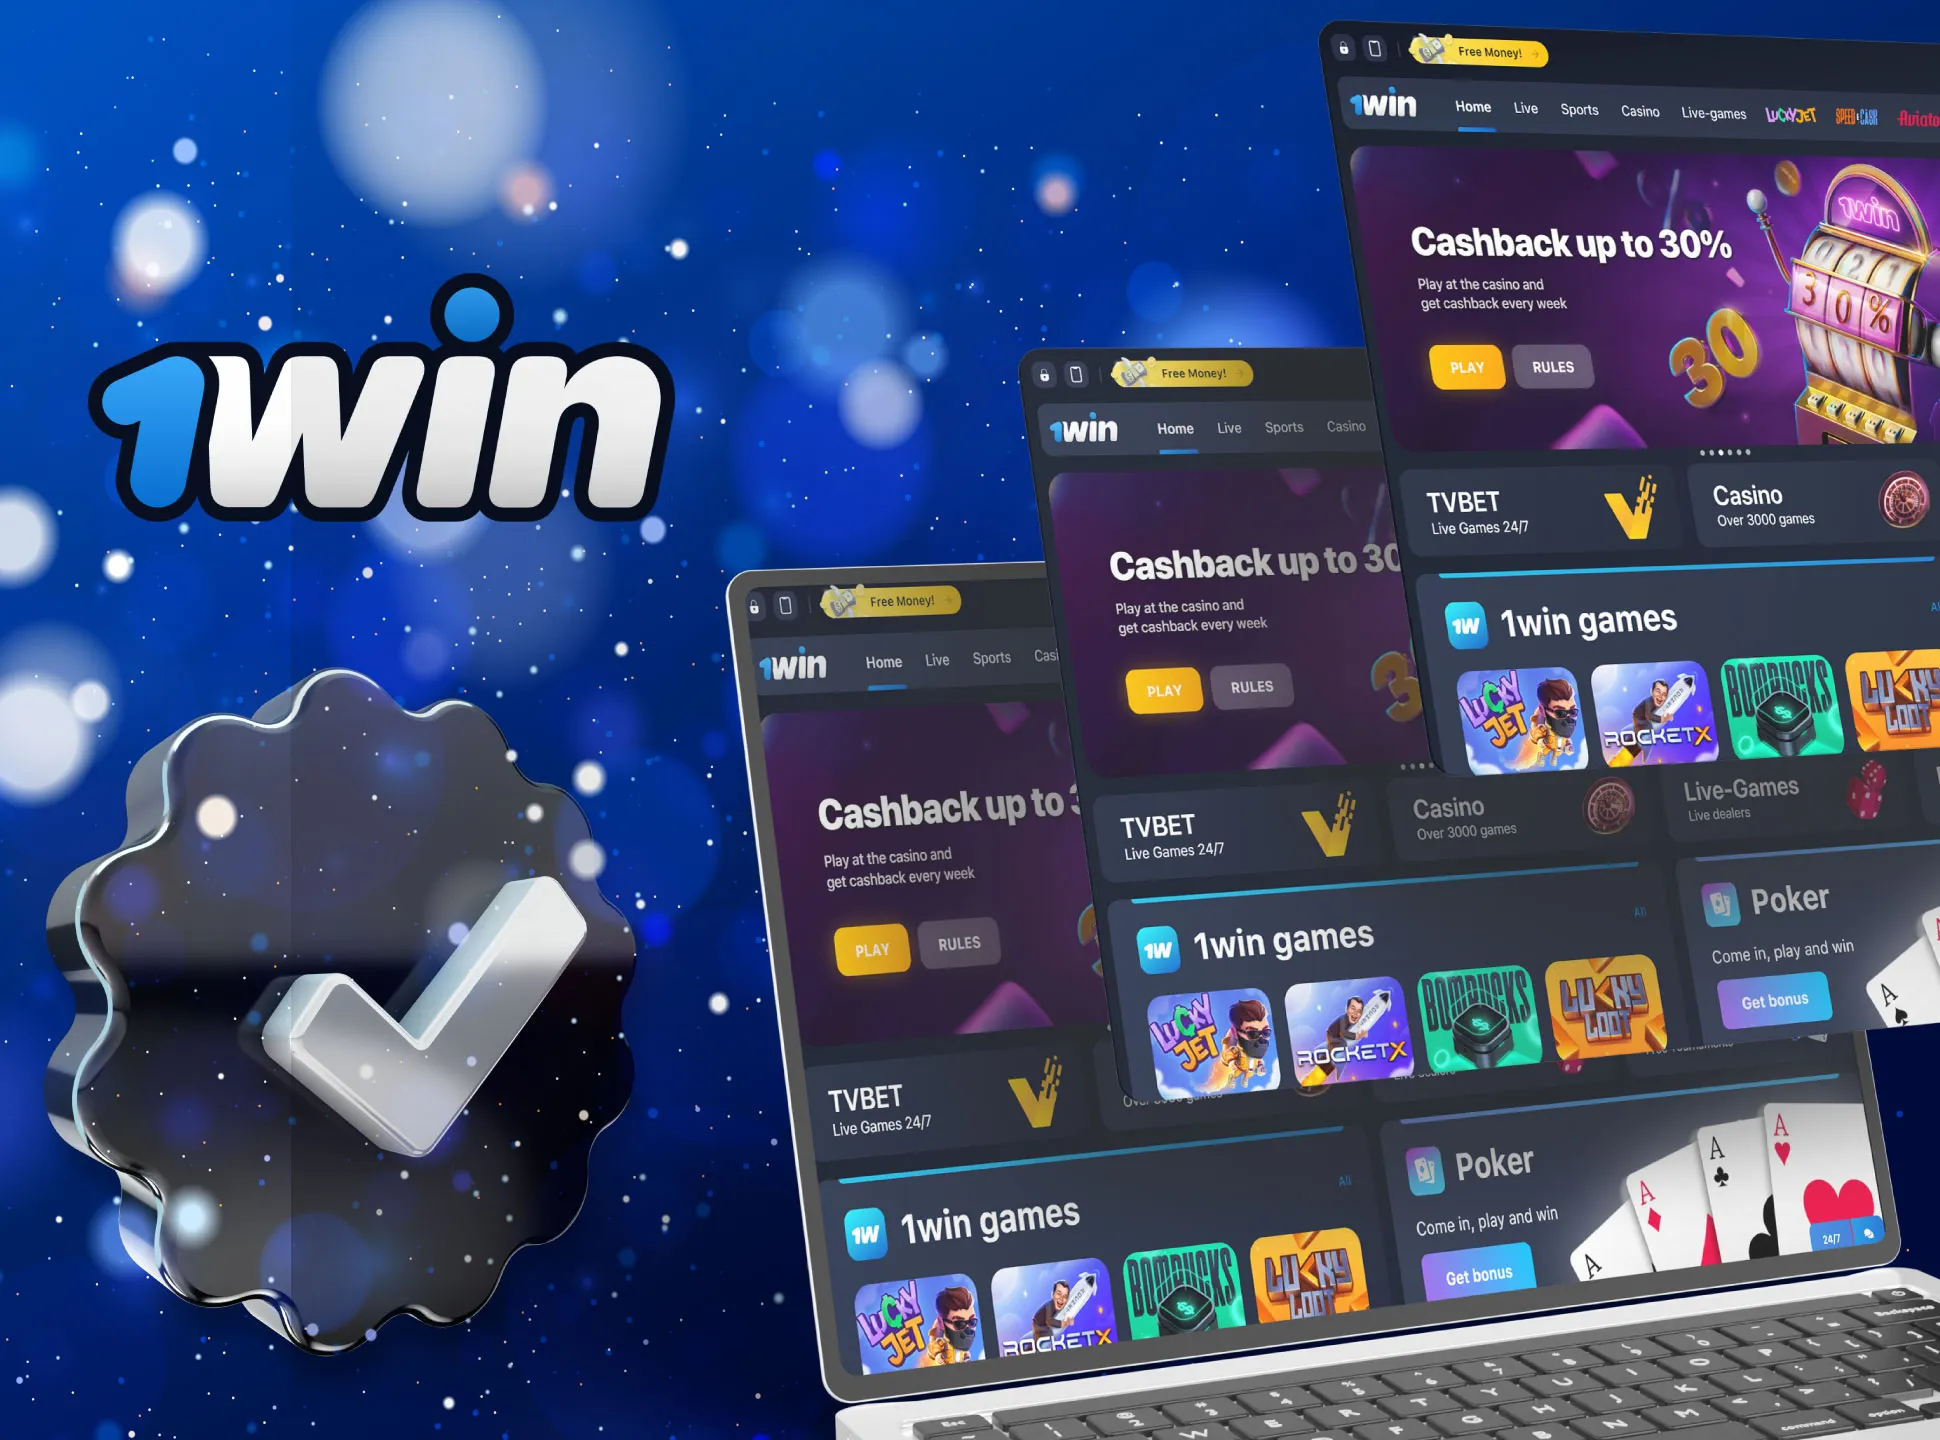 Download the 1win app, create your account and start betting on cricket and other sports.